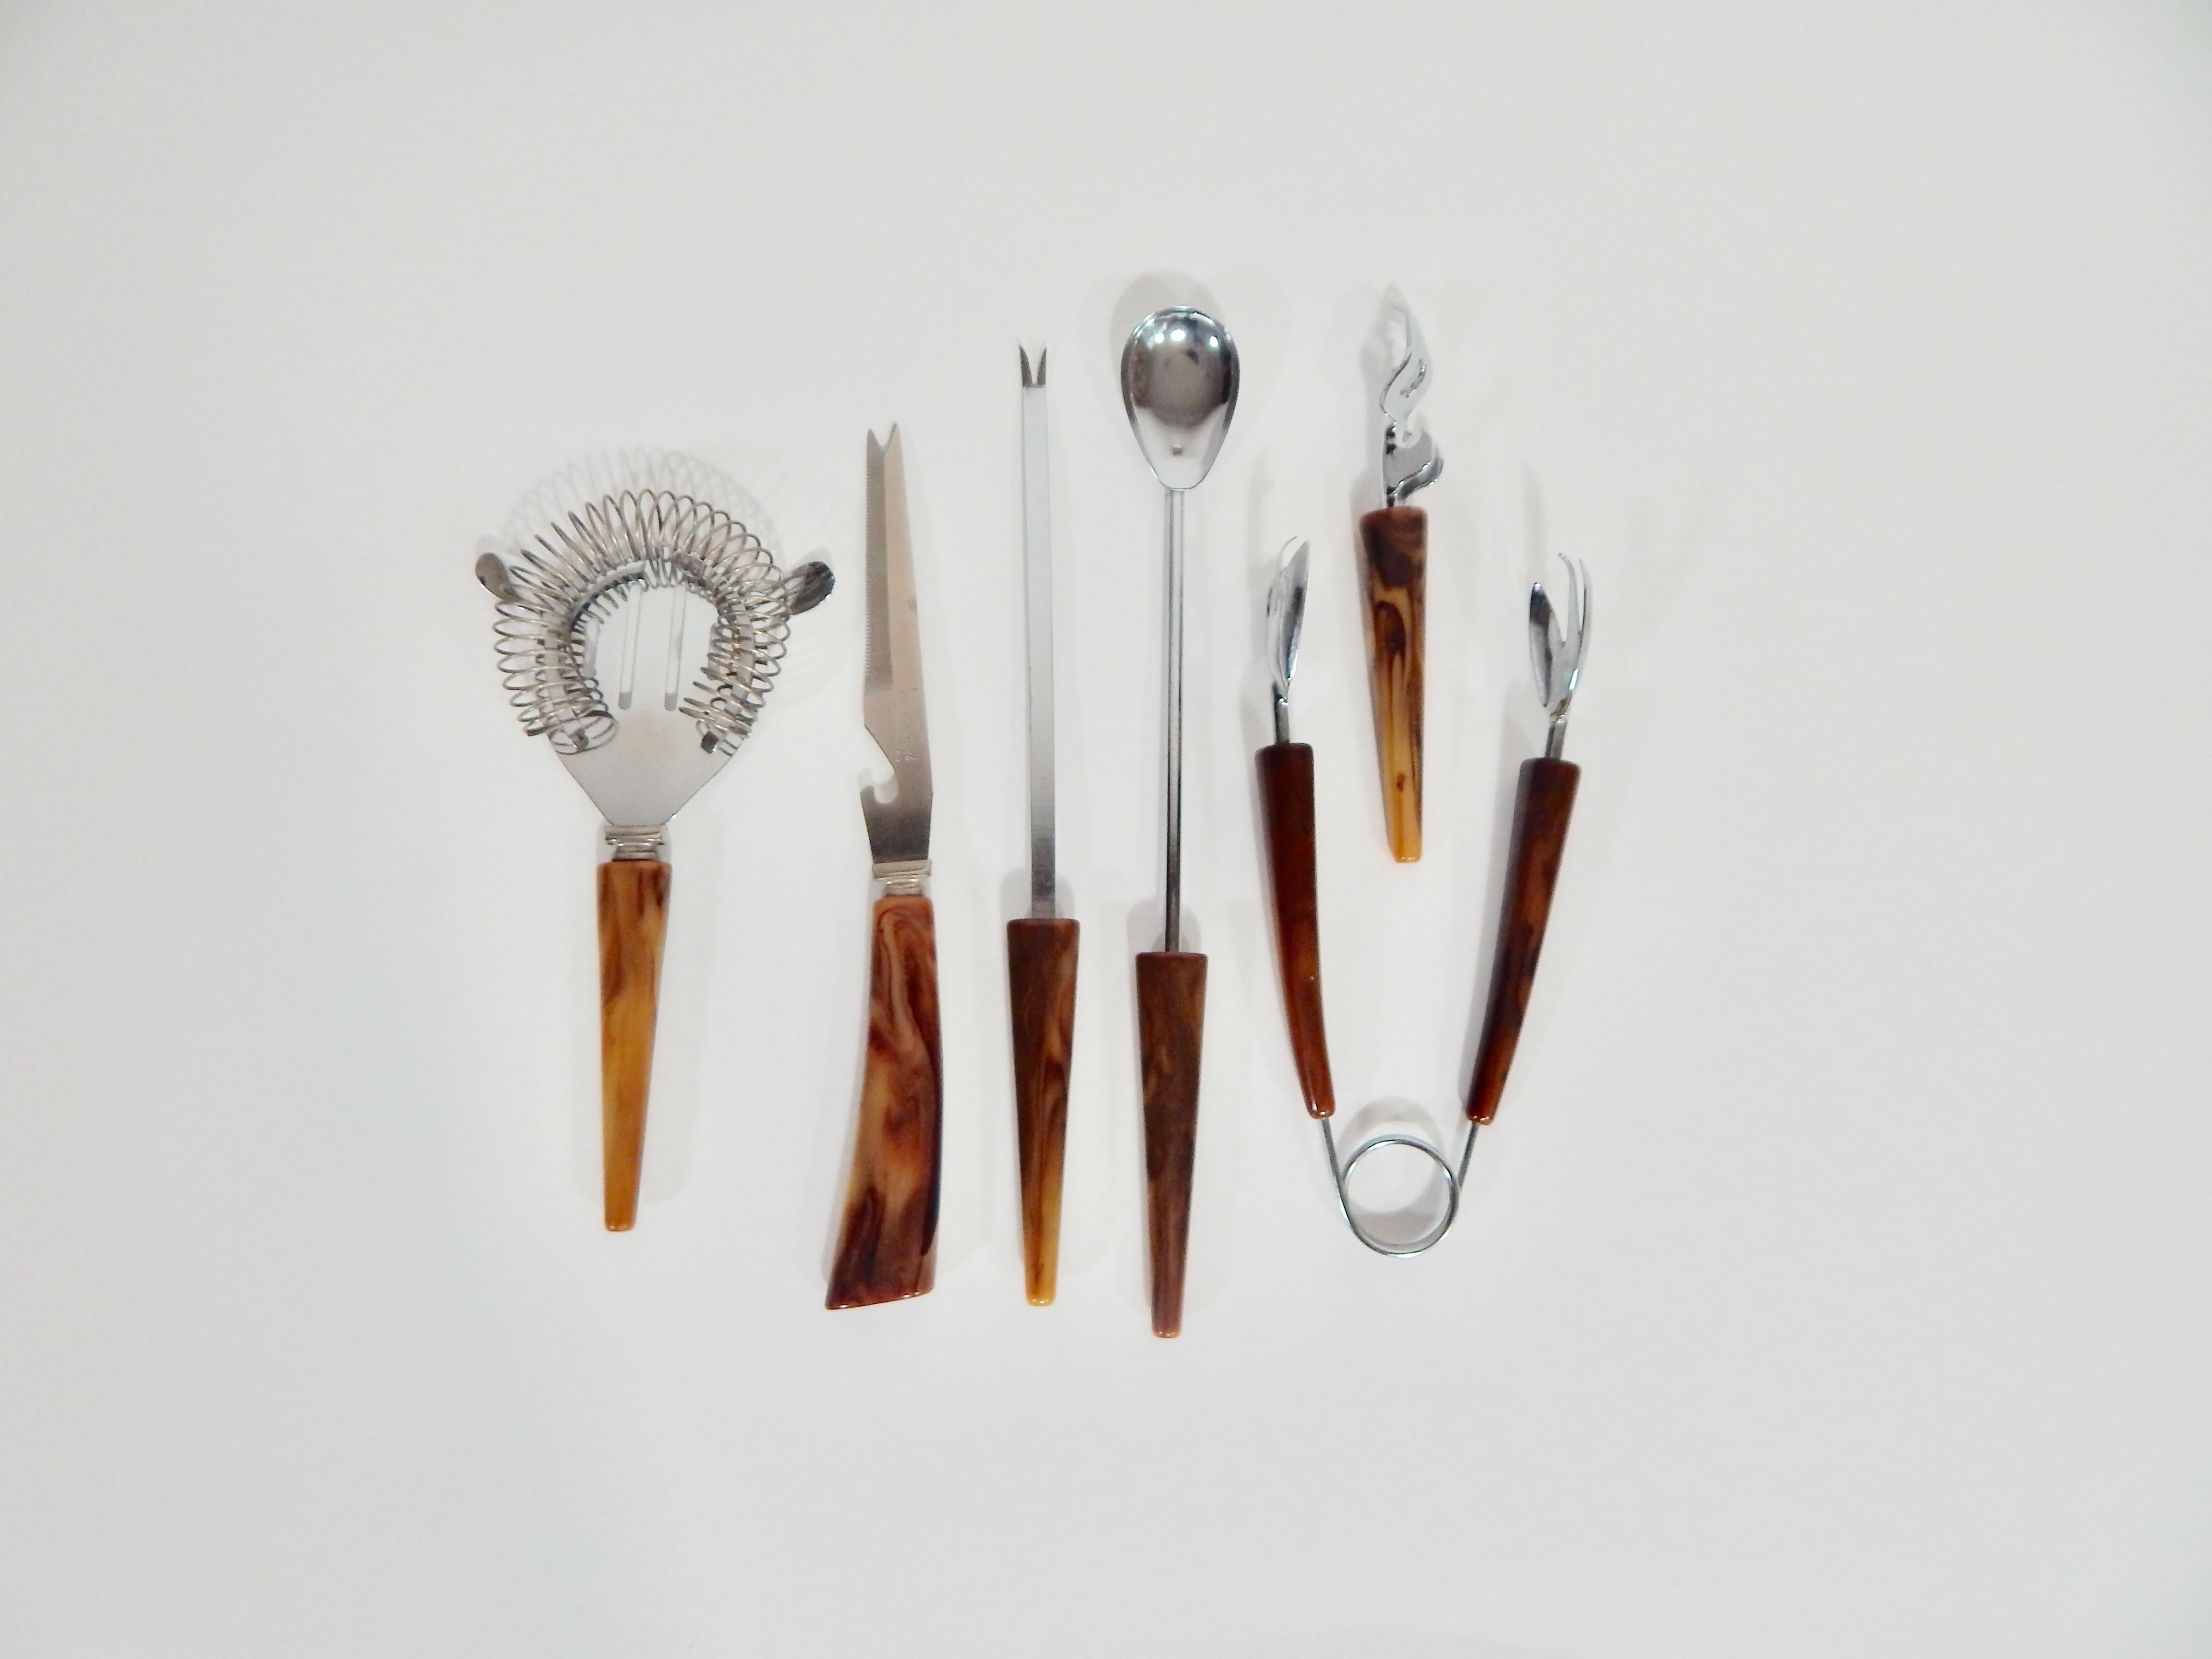 3 clear plastic bar utensils and a long handled spoon 6 Pieces of Vintage Bar Tools which consist of 2 pieces of bakelite bar utensils